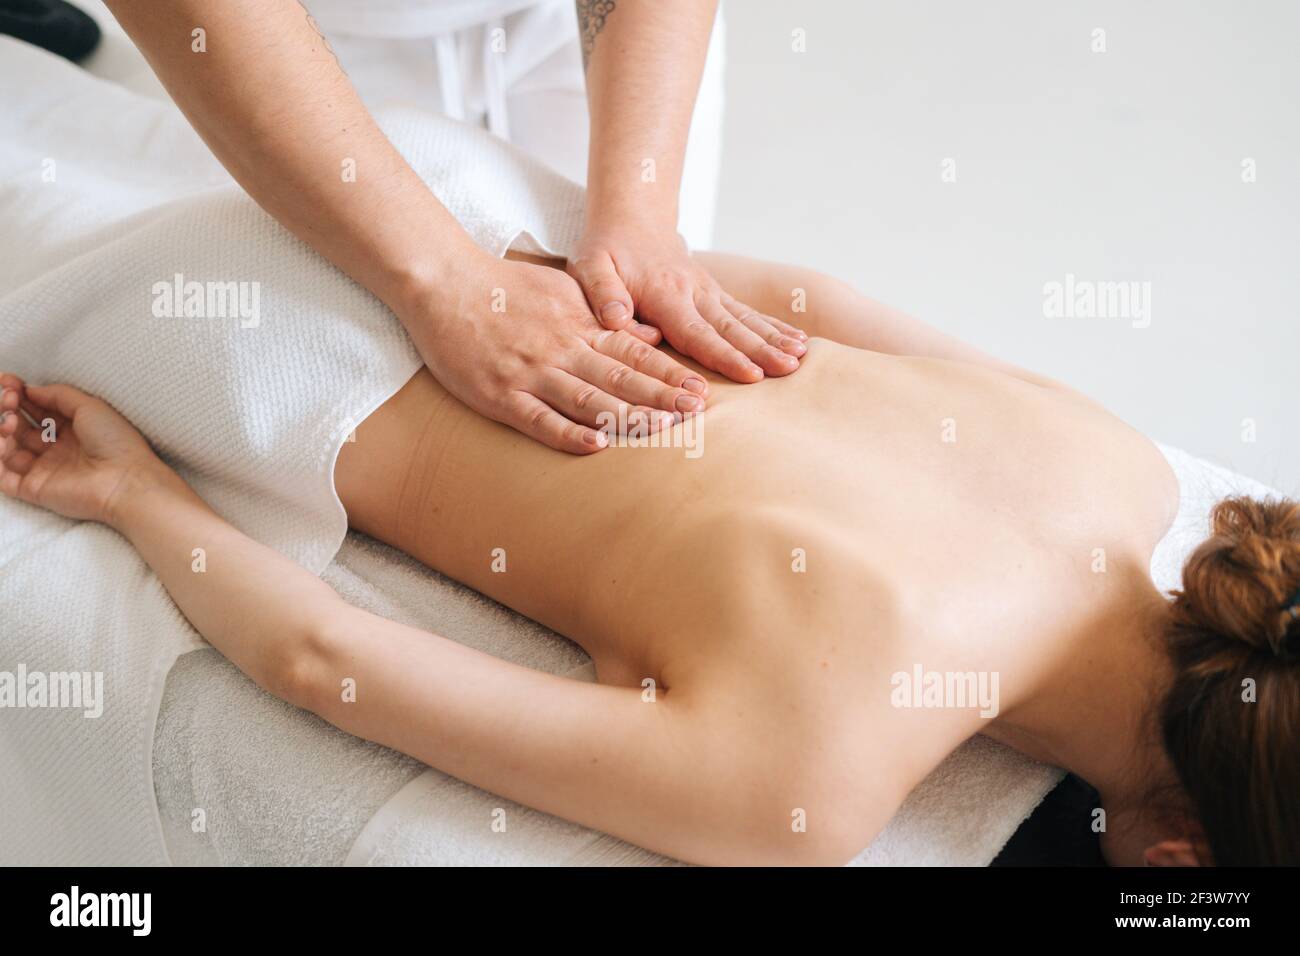 Top view of male masseur massaging back of young unrecognizable woman lying on massage table. Stock Photo